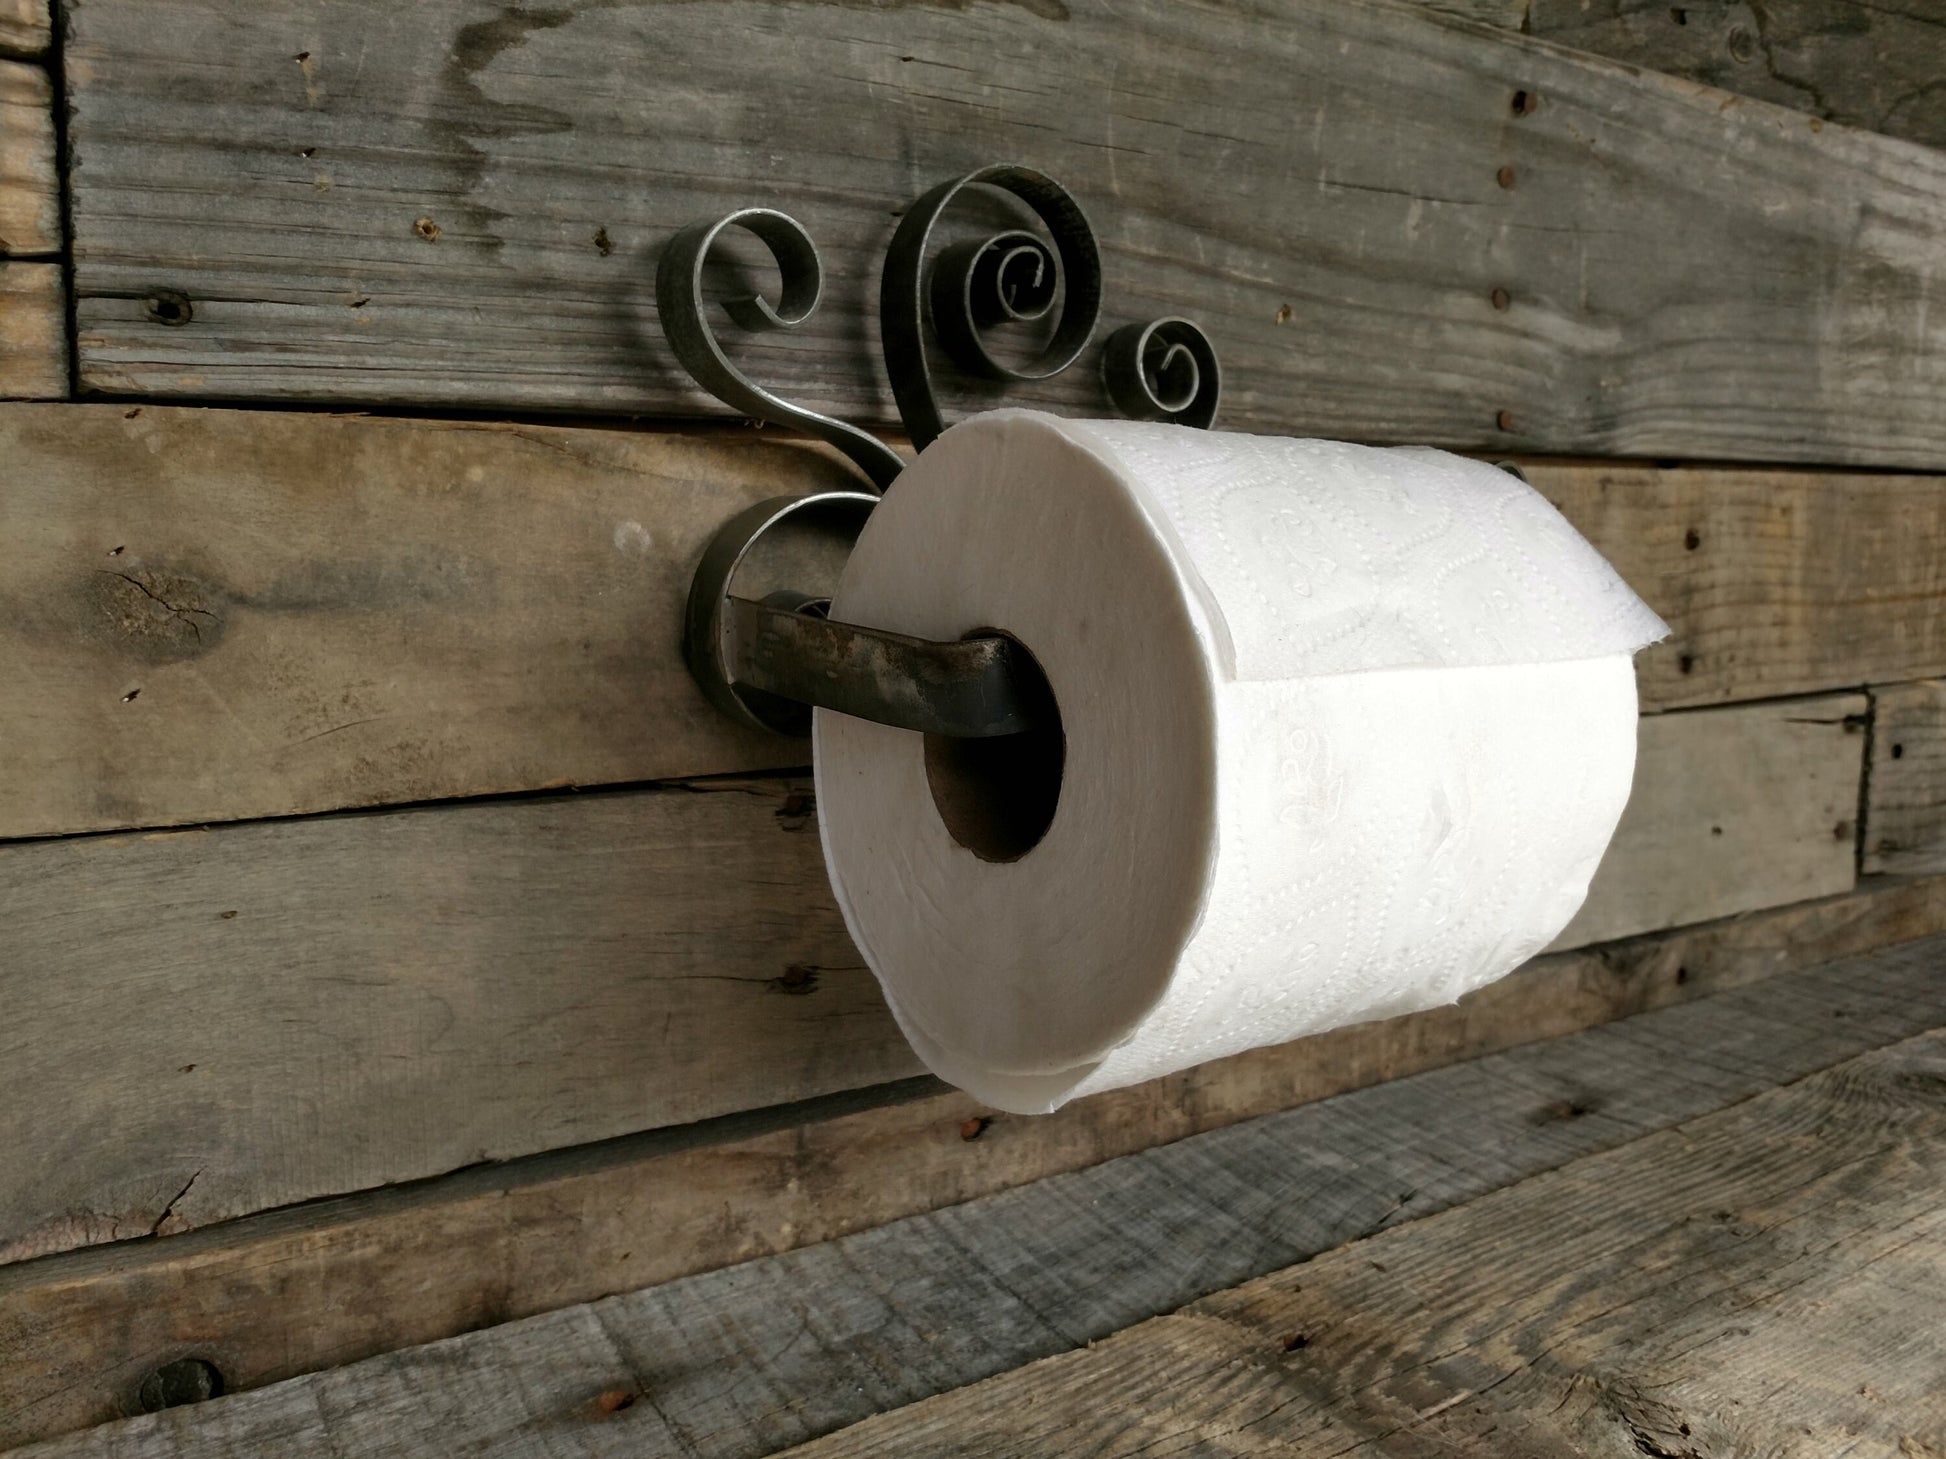 Wine Barrel Ring Toilet Paper Holder - Contorto - Made from retired CA wine barrel rings. 100% Recycled